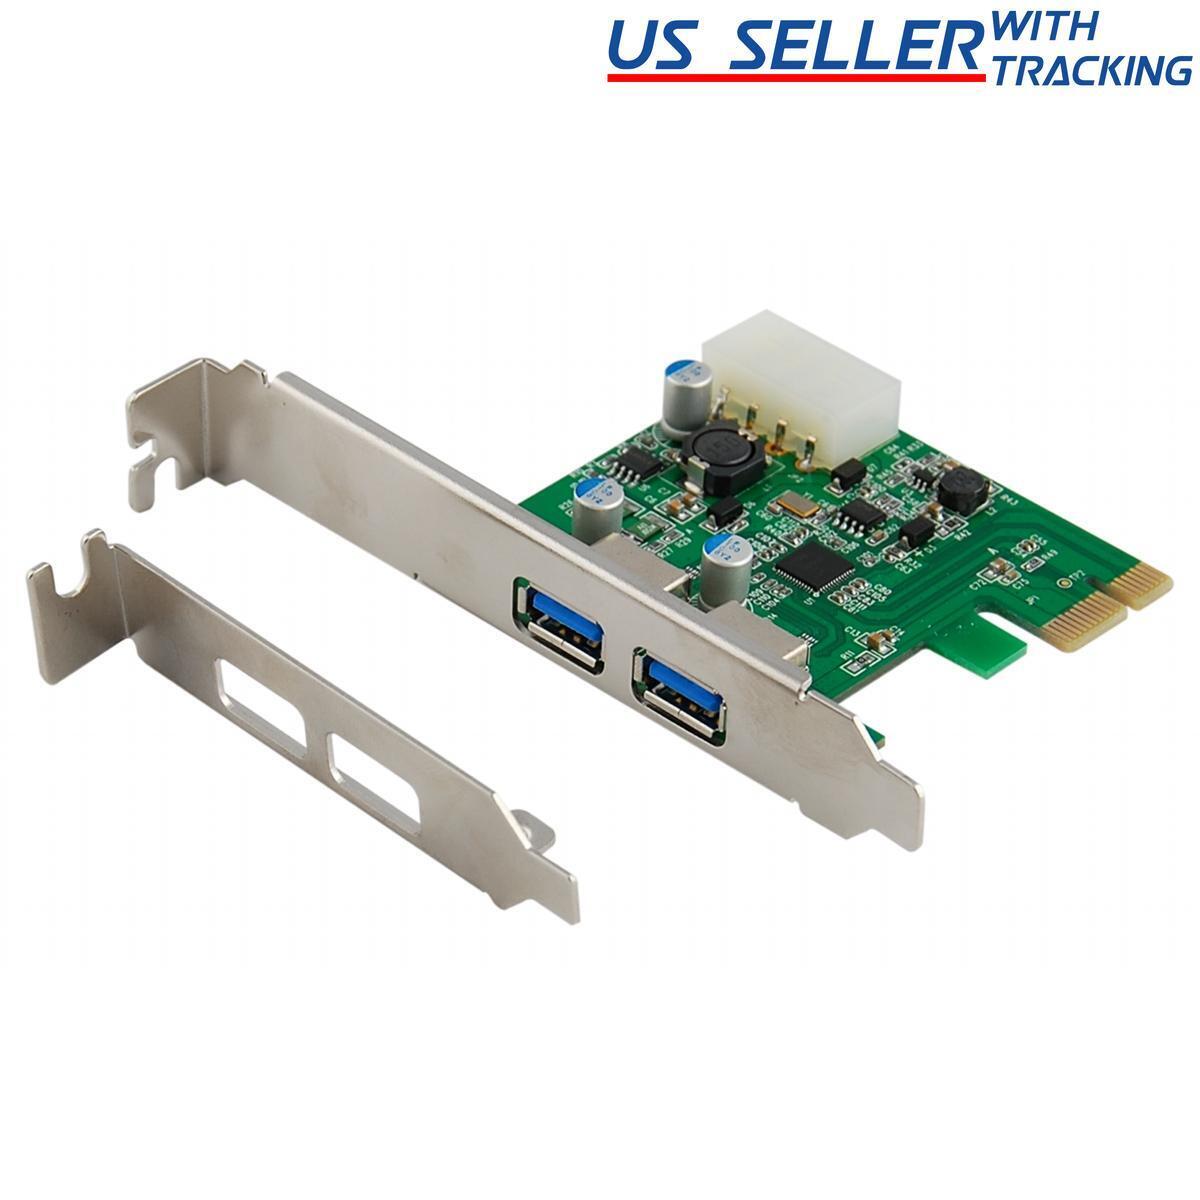 2-Port USB 3.0 PCI-Express PCIe Adapter Controller Card ~ Low Profile